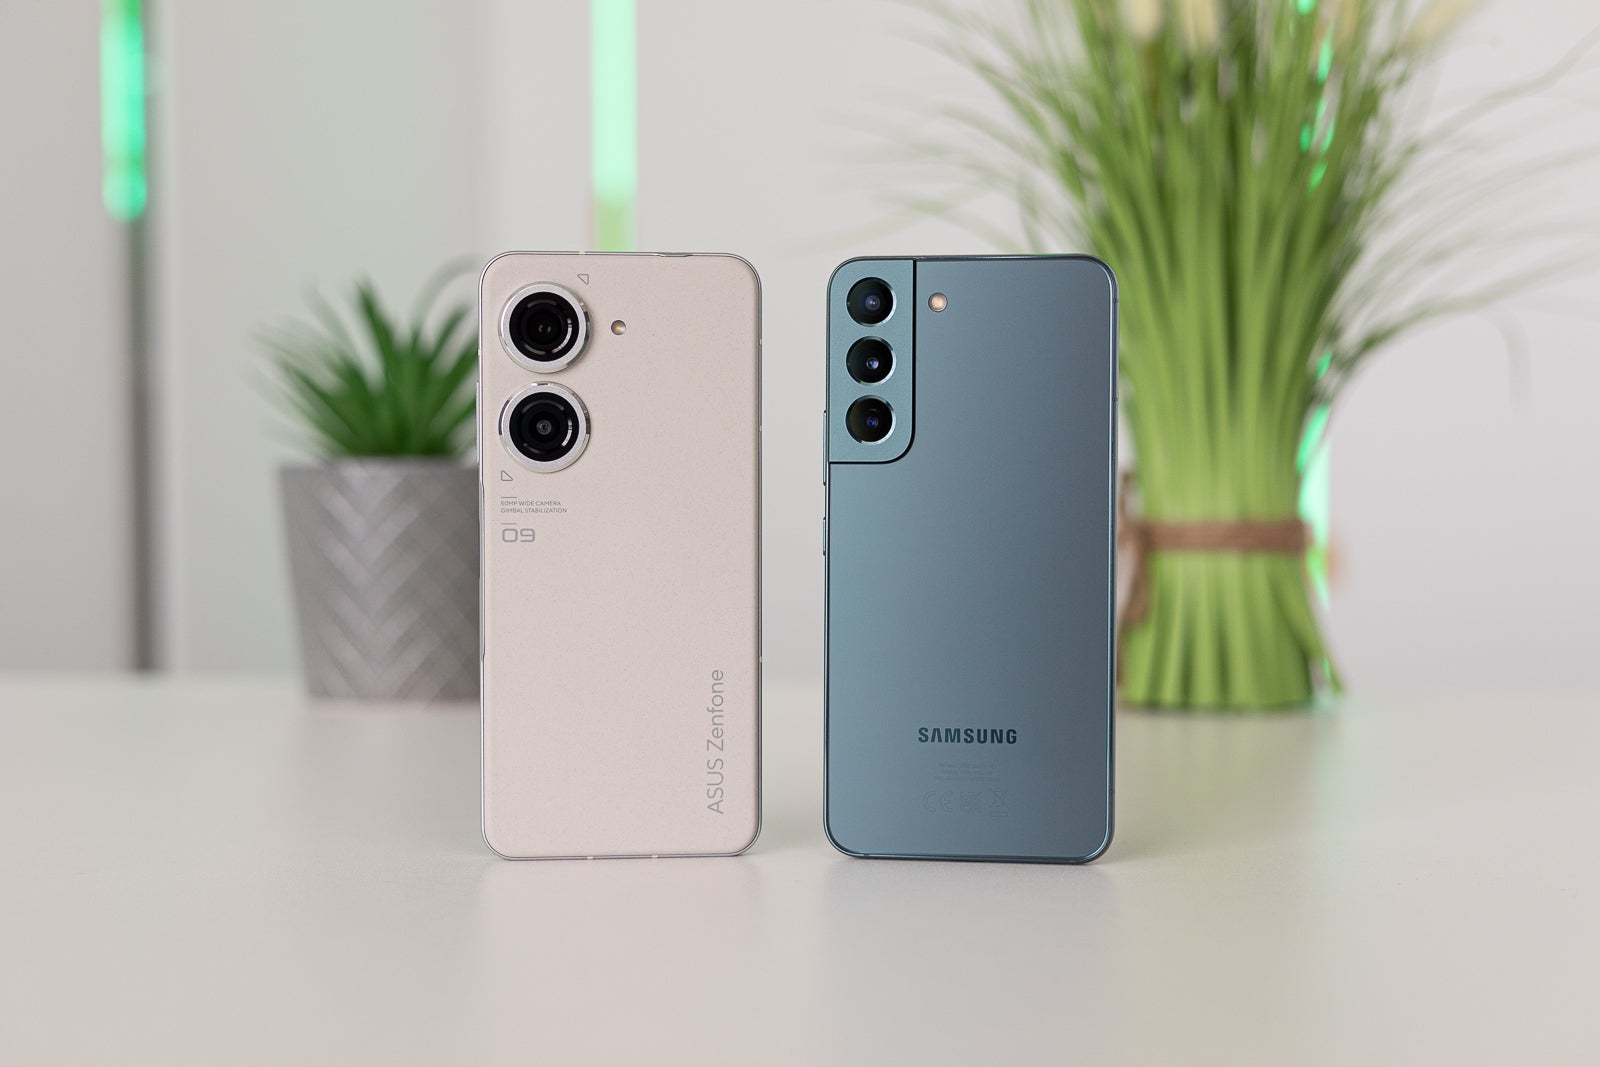 The Asus ZenFone 9 next to the Galaxy S22 (Image credit PhoneArena) - In search of the perfect compact phone: Asus ZenFone 9